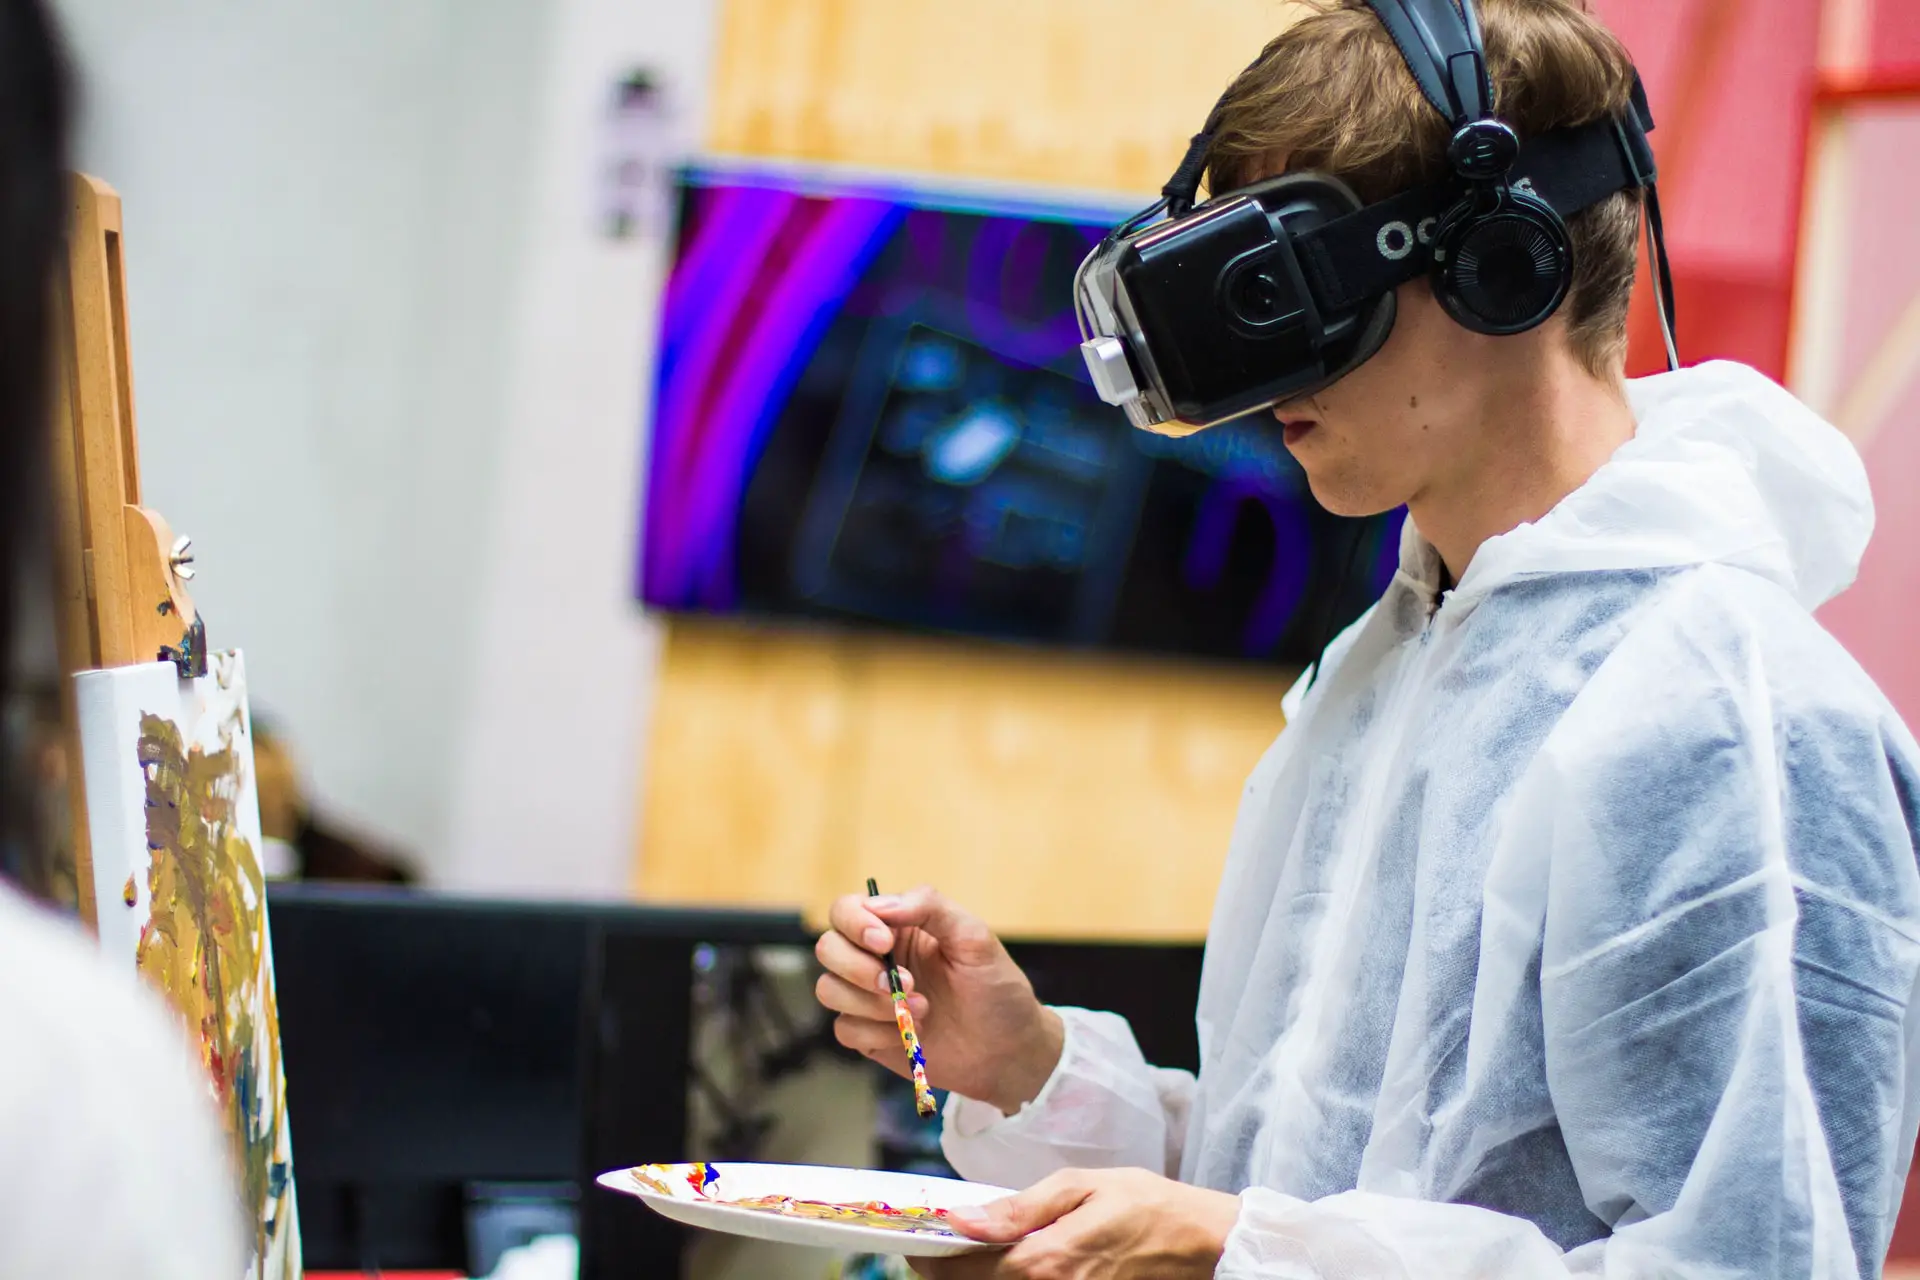 VR to Provide Novel Learning Opportunities to Students in Southern Arizona Classrooms